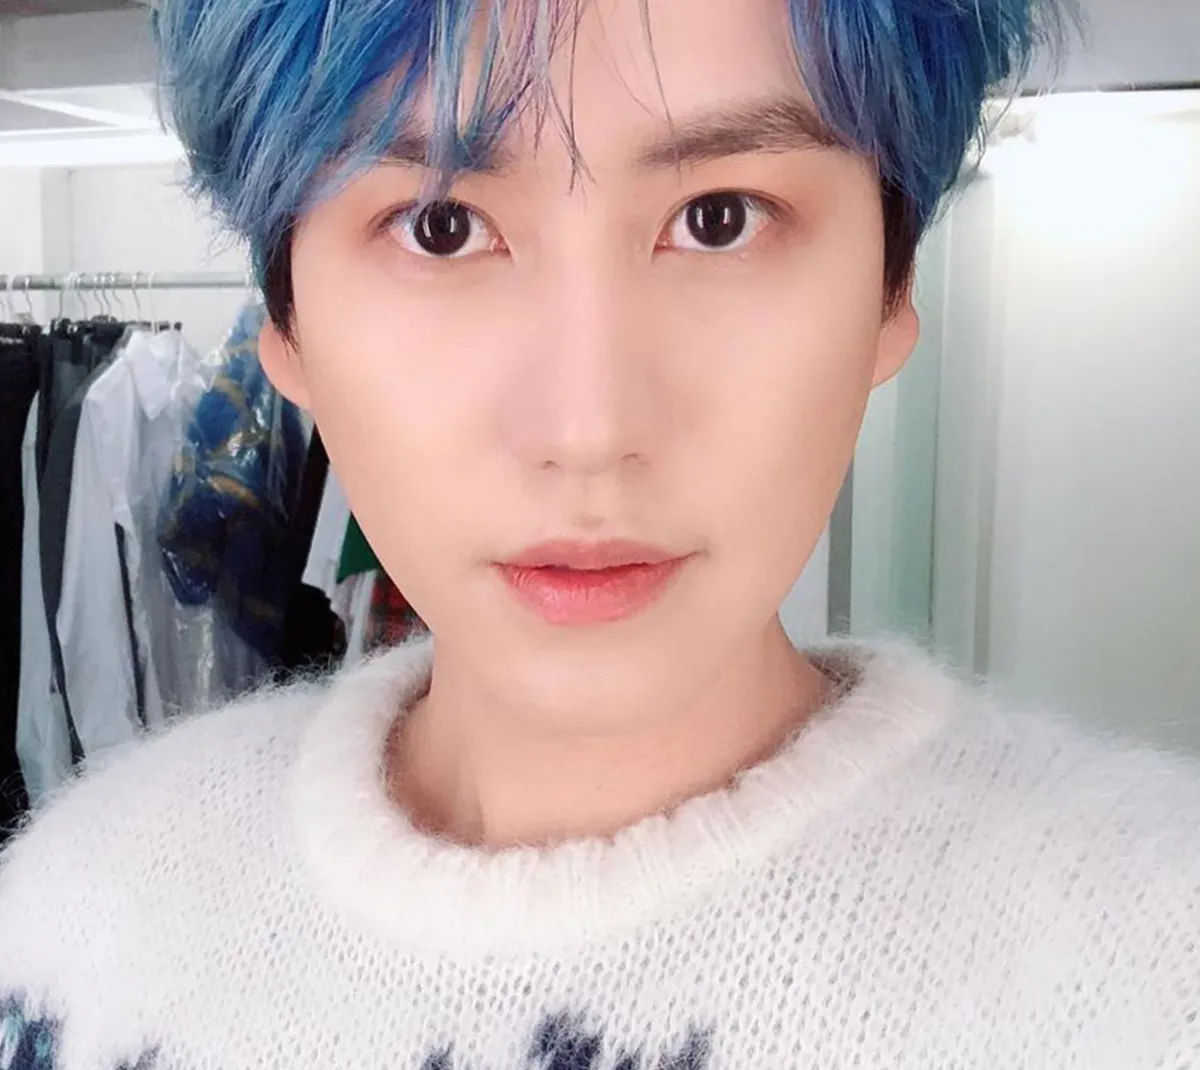 Choi Kyuhyun, a K-pop boyband Super Junior member, experienced an unfortunate incident. He was injured during a knife attack in Seoul, as reported by Koreaboo.